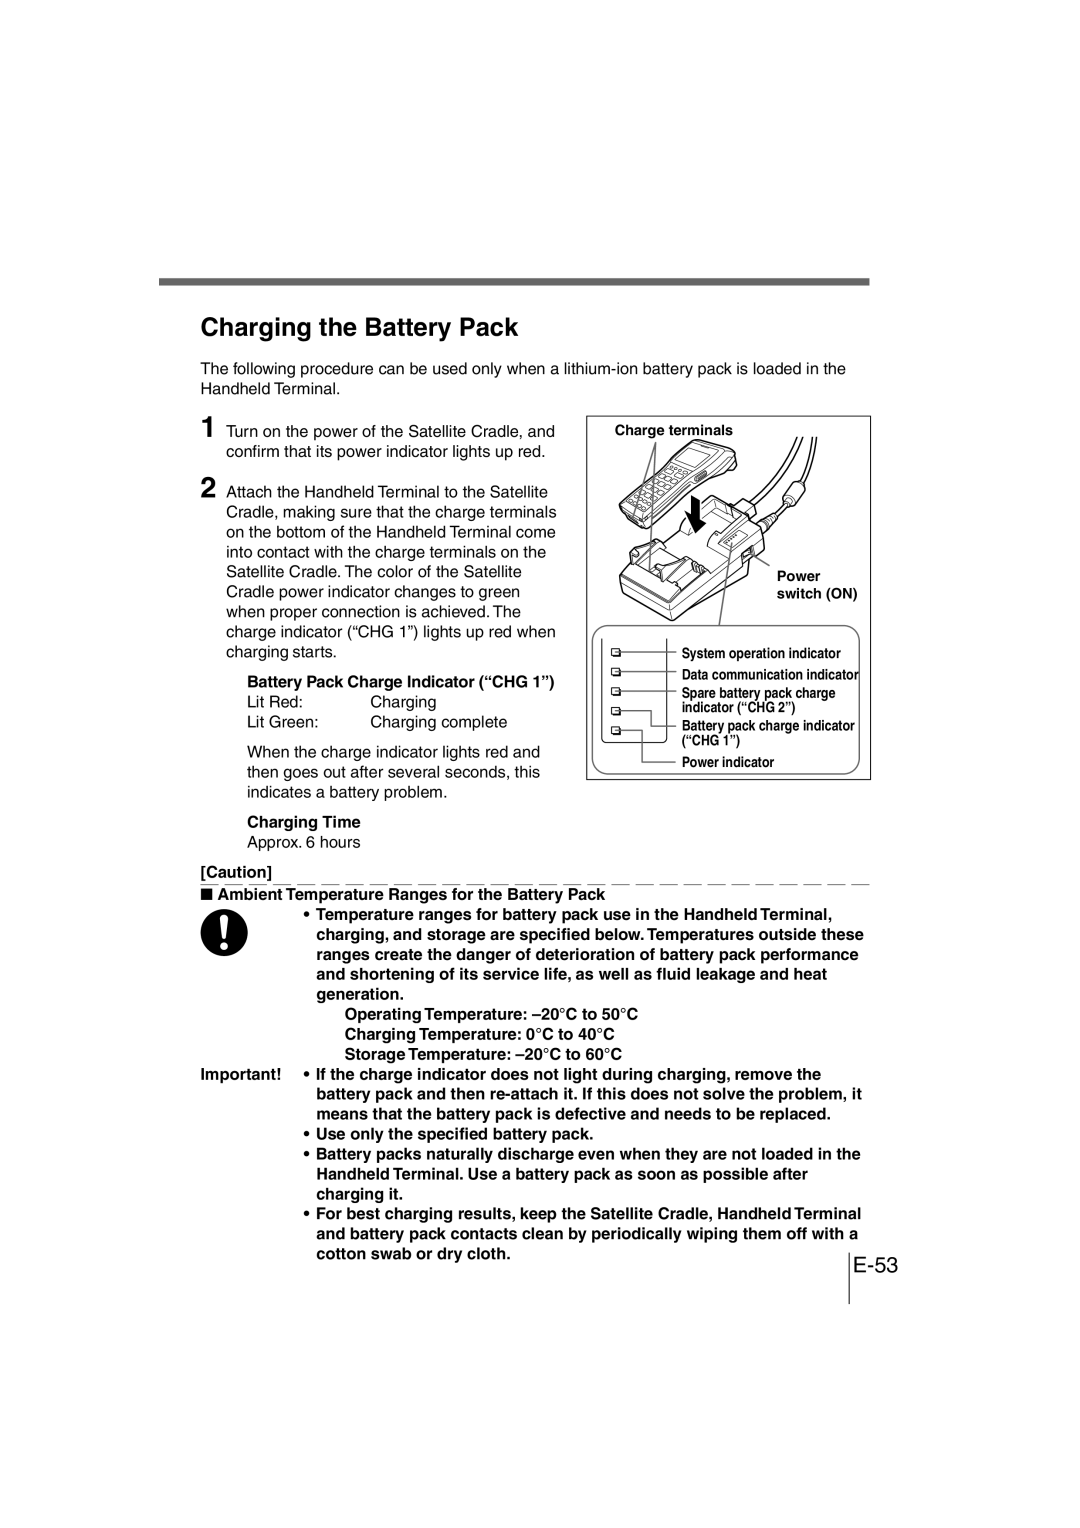 Casio DT-930 manual Charging the Battery Pack 